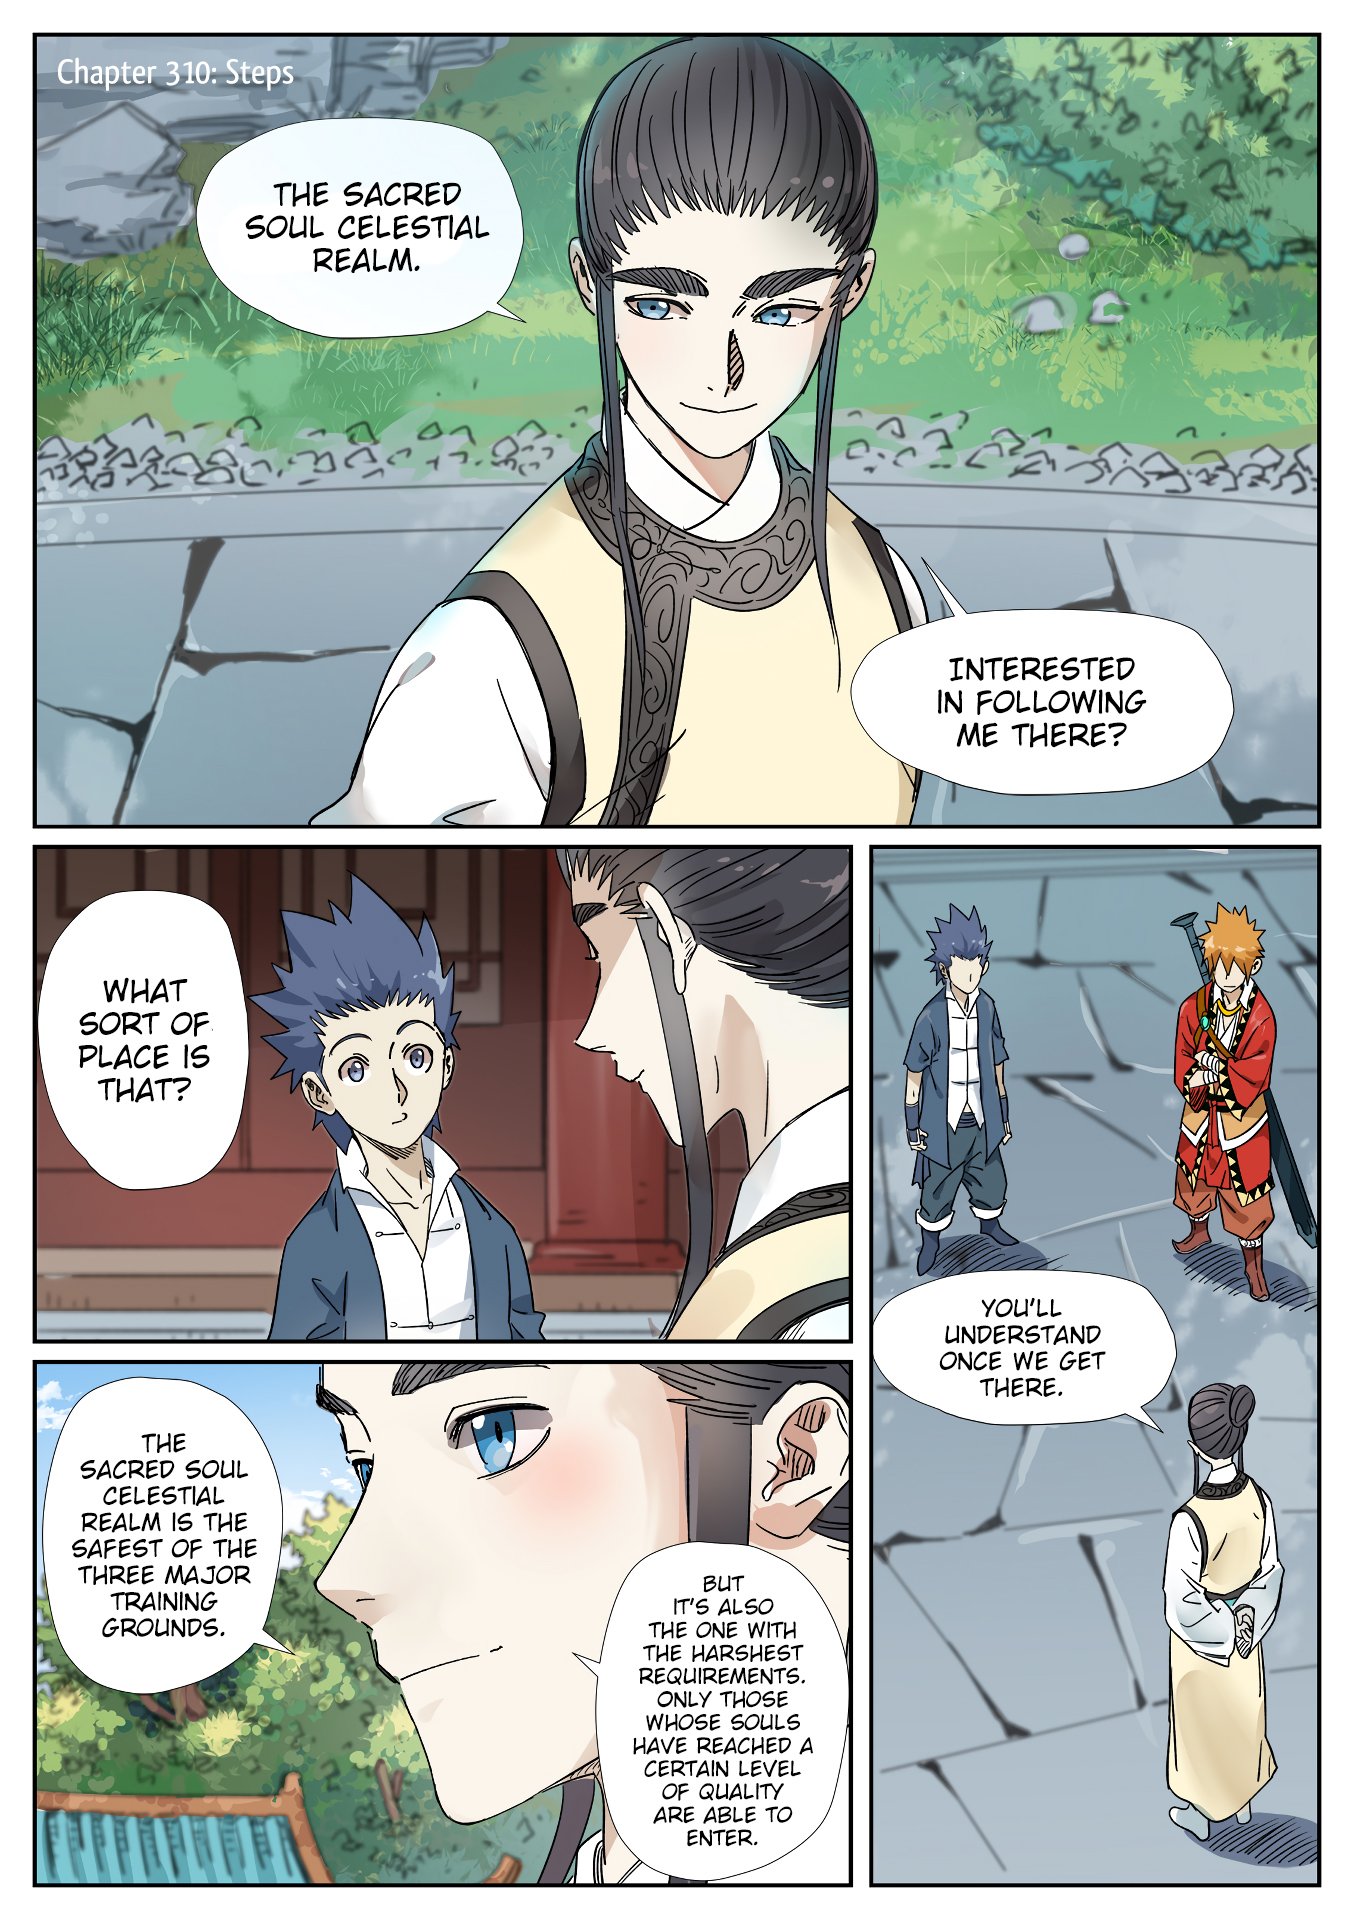 Tales of Demons and Gods Manhua Chapter 310 - Page 1